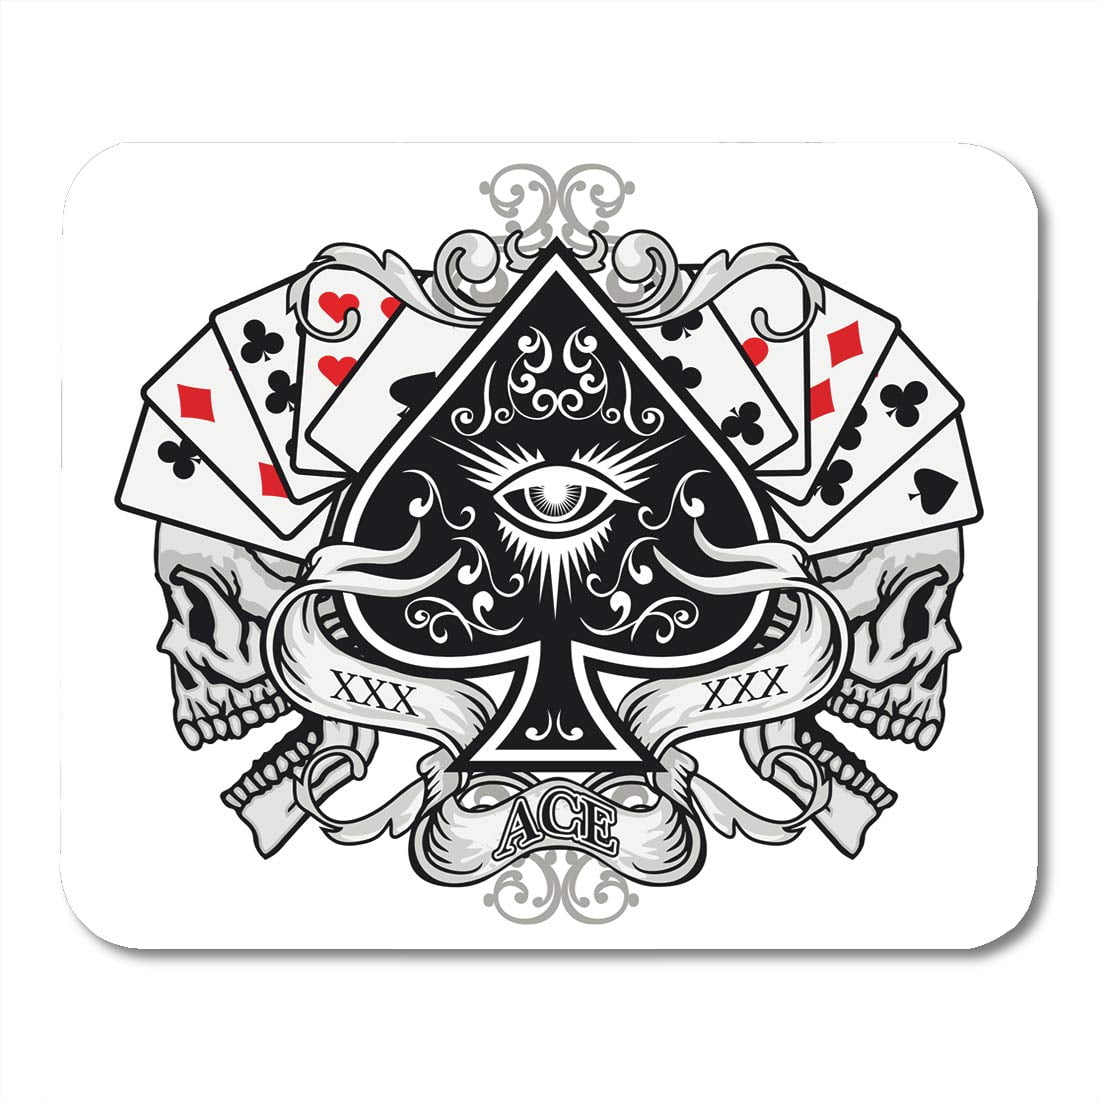 1100px x 1100px - Queen Gothic of Arms Skull and Ace Spades Vintage King Pirate Zombie  Mousepad Mouse Pad Mouse Mat 9x10 inch - Walmart.com